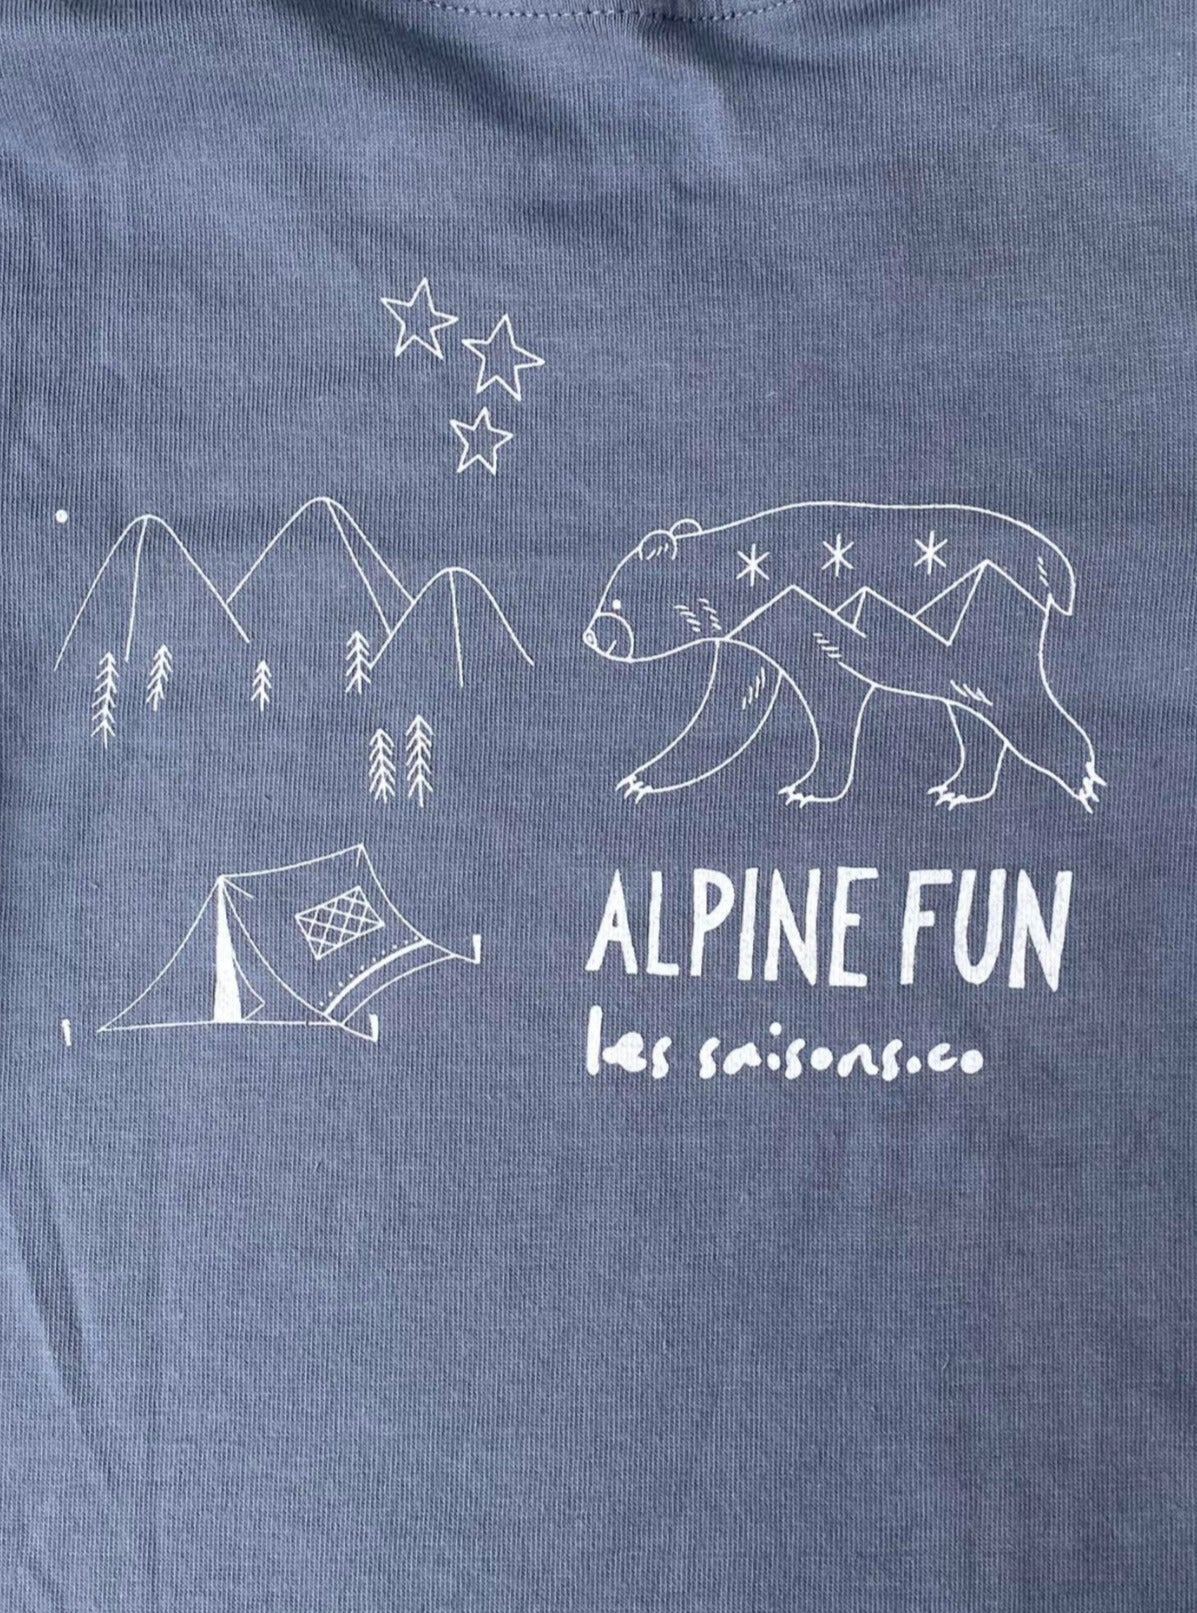 alpine fun shirt for kids, made in canada, comfortable and cute. Les saisons illustration of a bear, mountains and a camping tent.  Light blue grey color